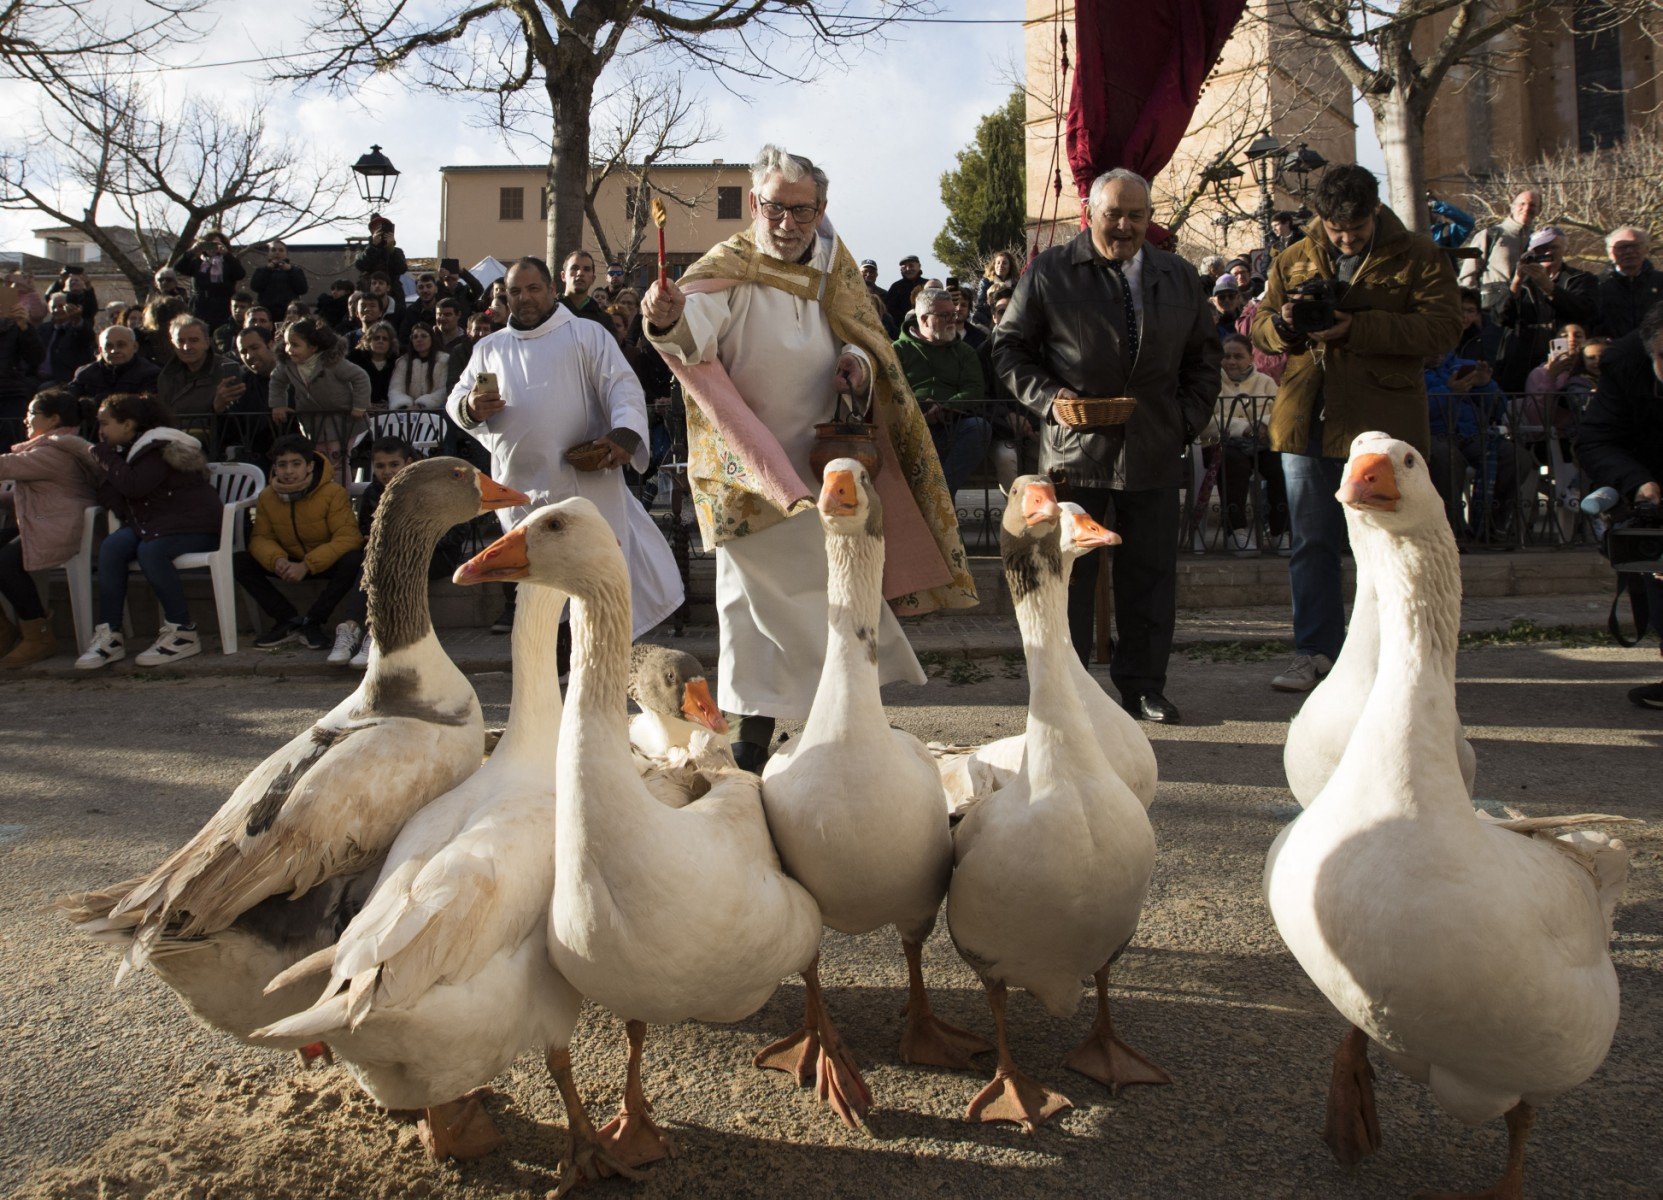 Why Spain has a day where priests bless animals thumbnail